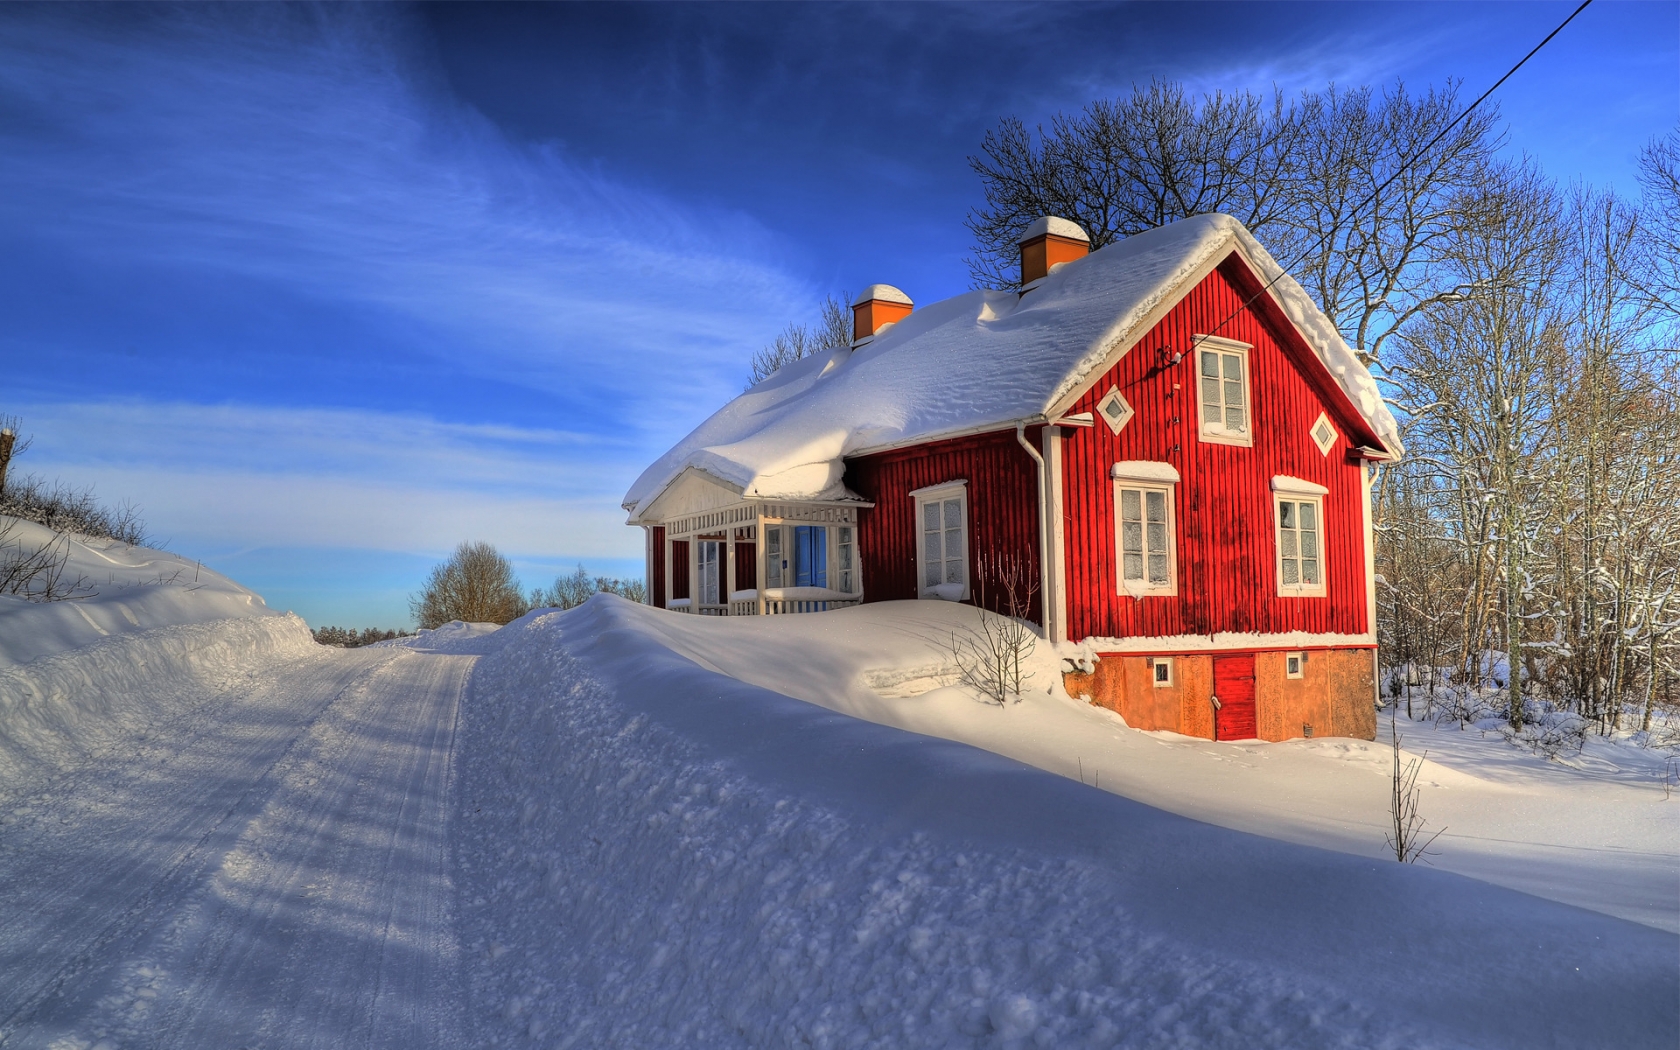 House Between Snow for 1680 x 1050 widescreen resolution